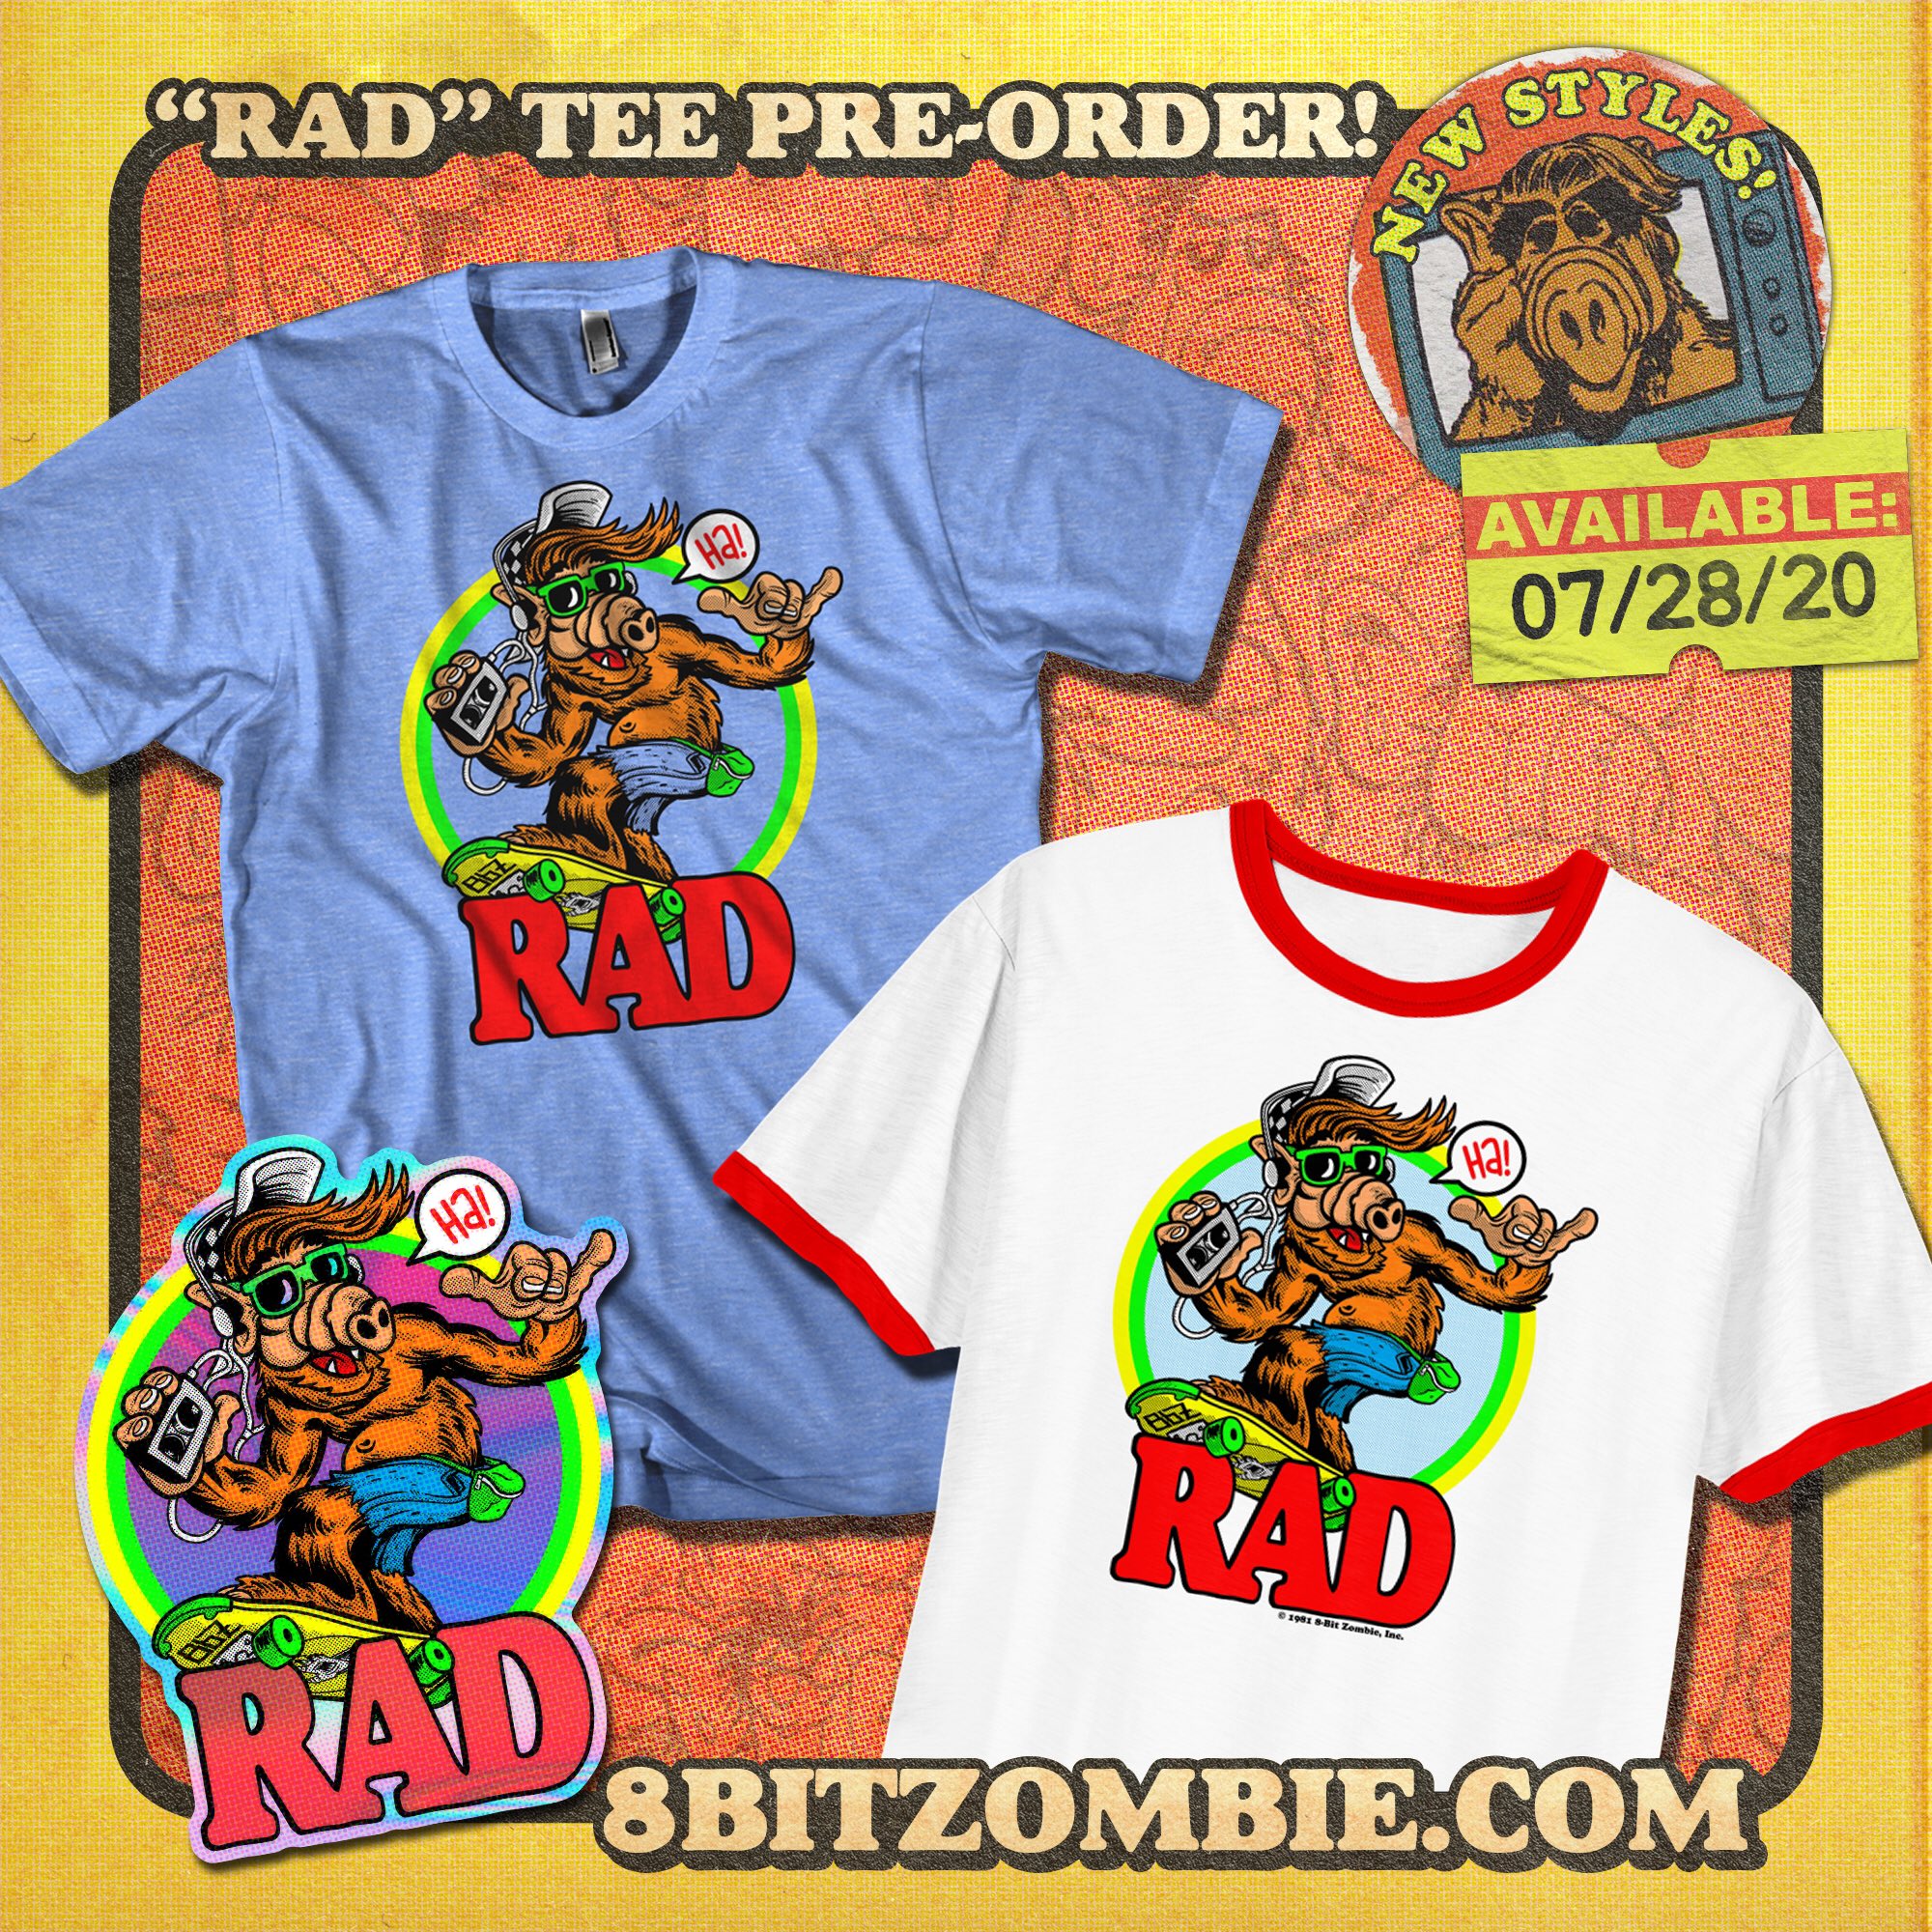 8-bit ZOMBIE on X: You guys asked it, ALF is coming back! The classic blue  tee will be up for grabs & I've whipped up a ringer version for ultimate  retro-rad vibes.